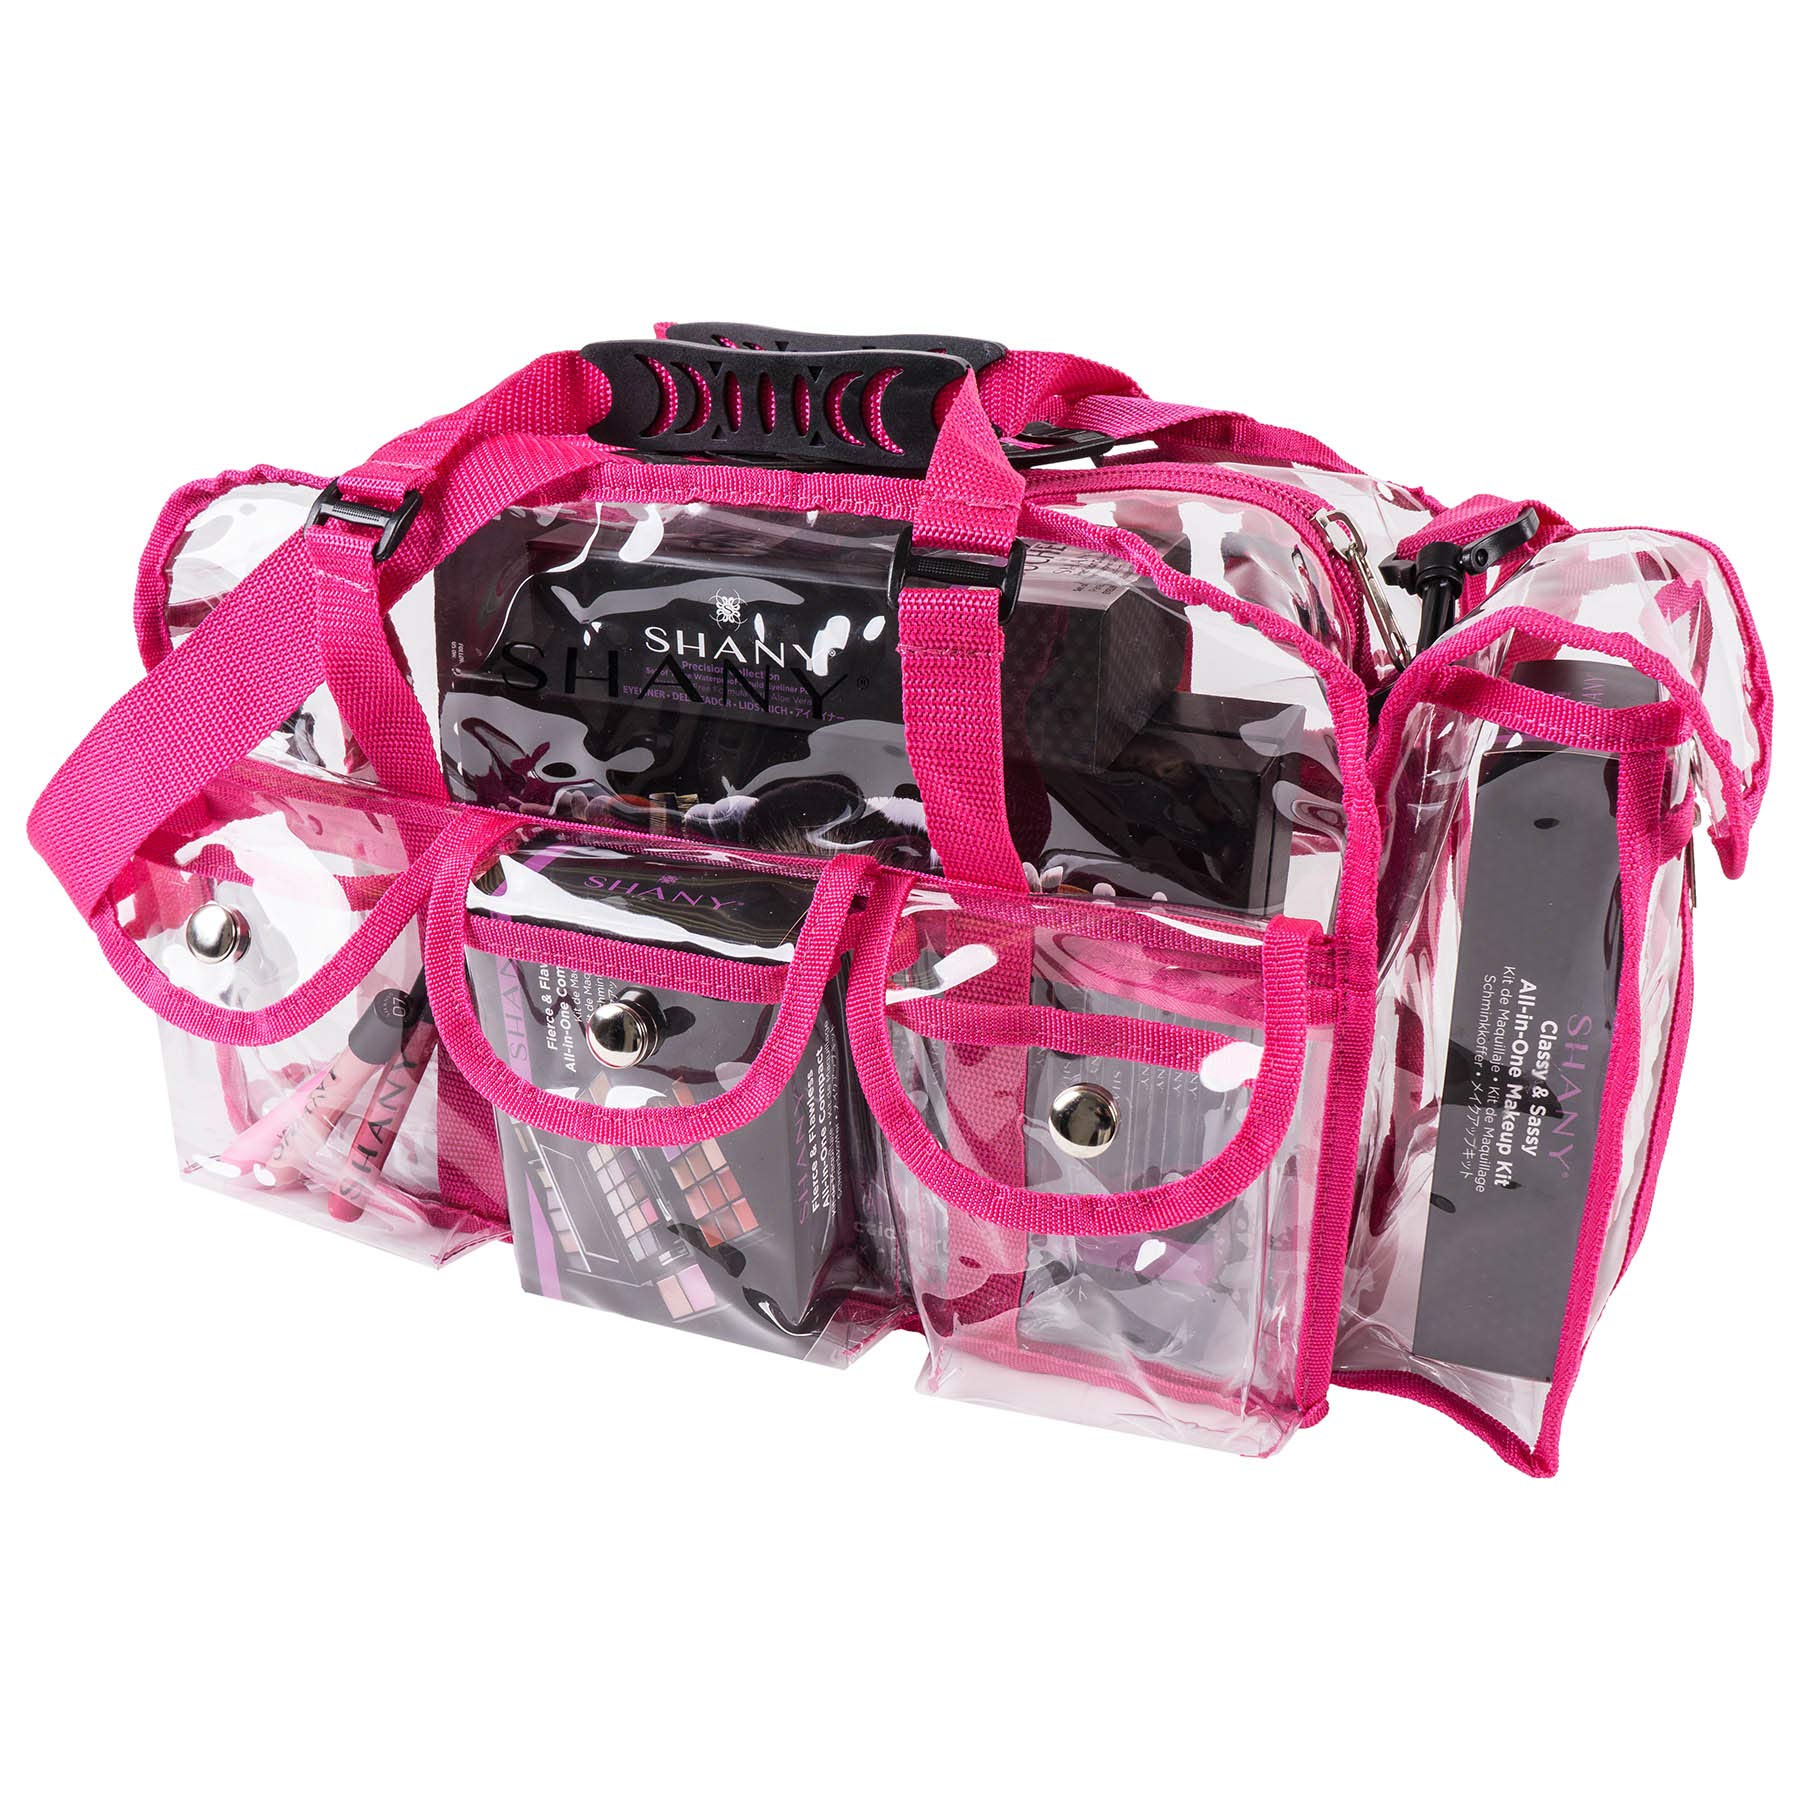 SHANY Clear PVC Makeup Bag - Large Professional Makeup Artist Rectangular Tote with Shoulder Strap and 5 External Pockets - PINK